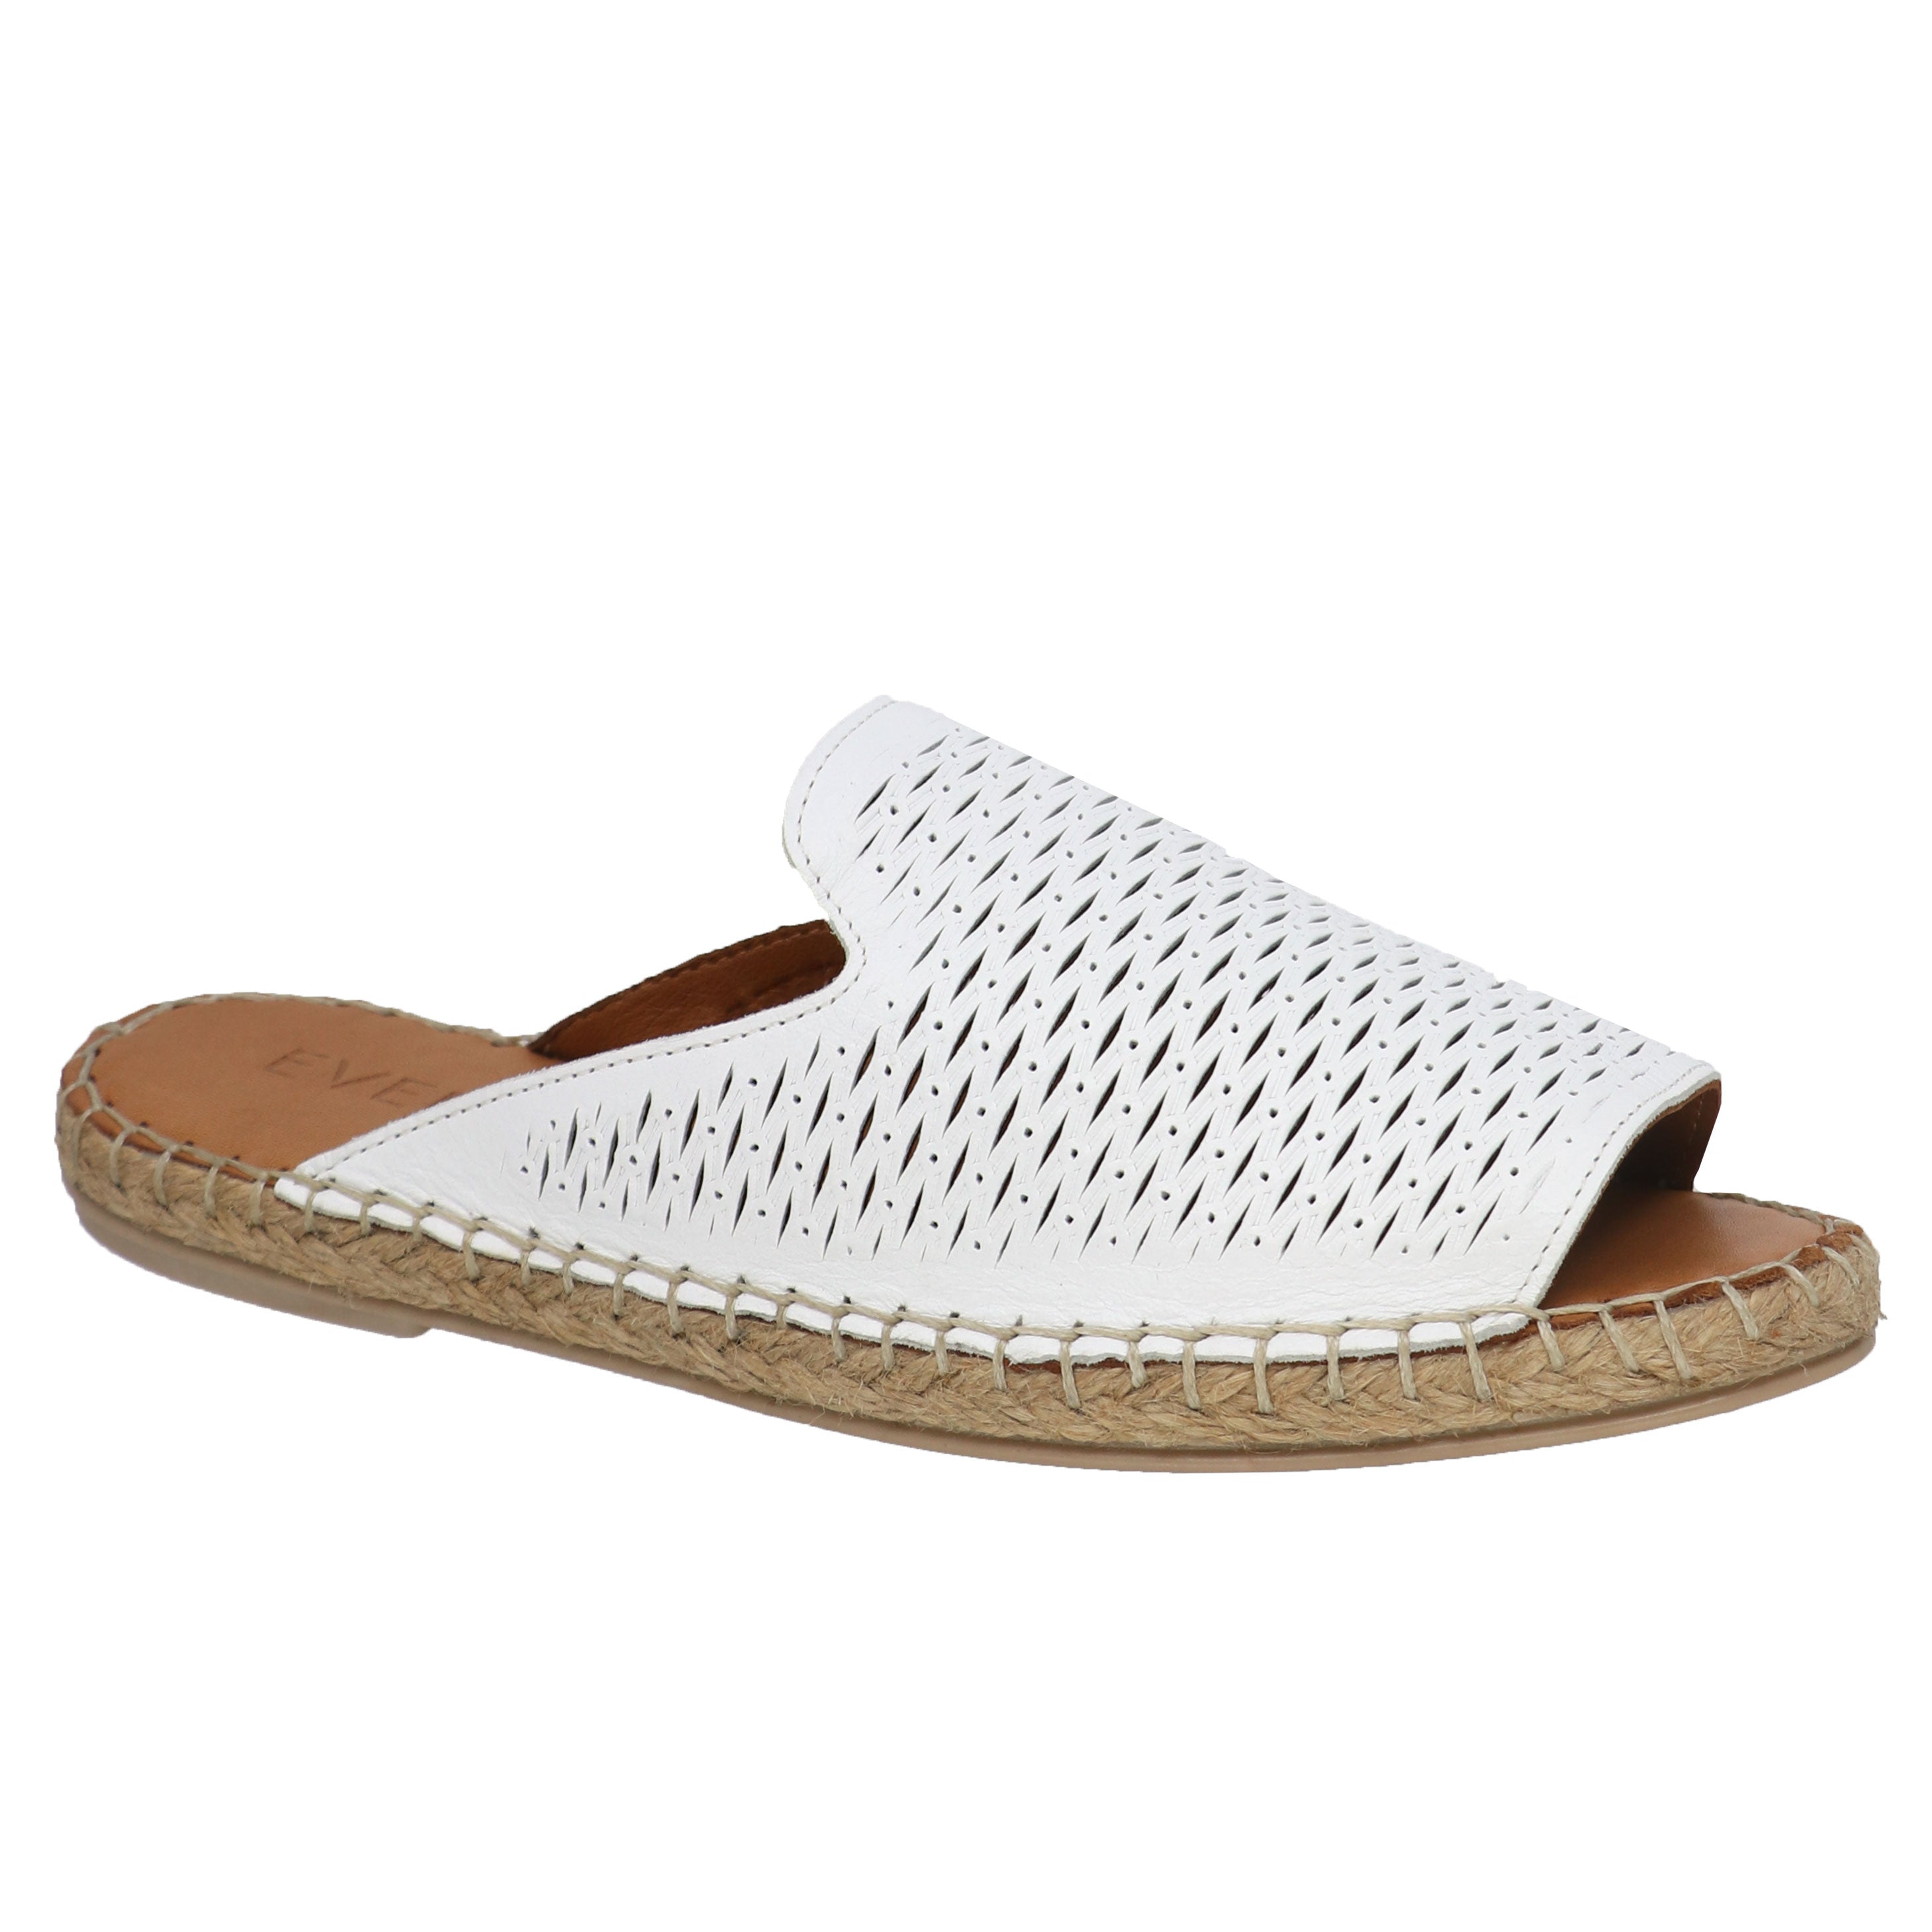 EVERLY VENICE SHOE LEATHER WHITE